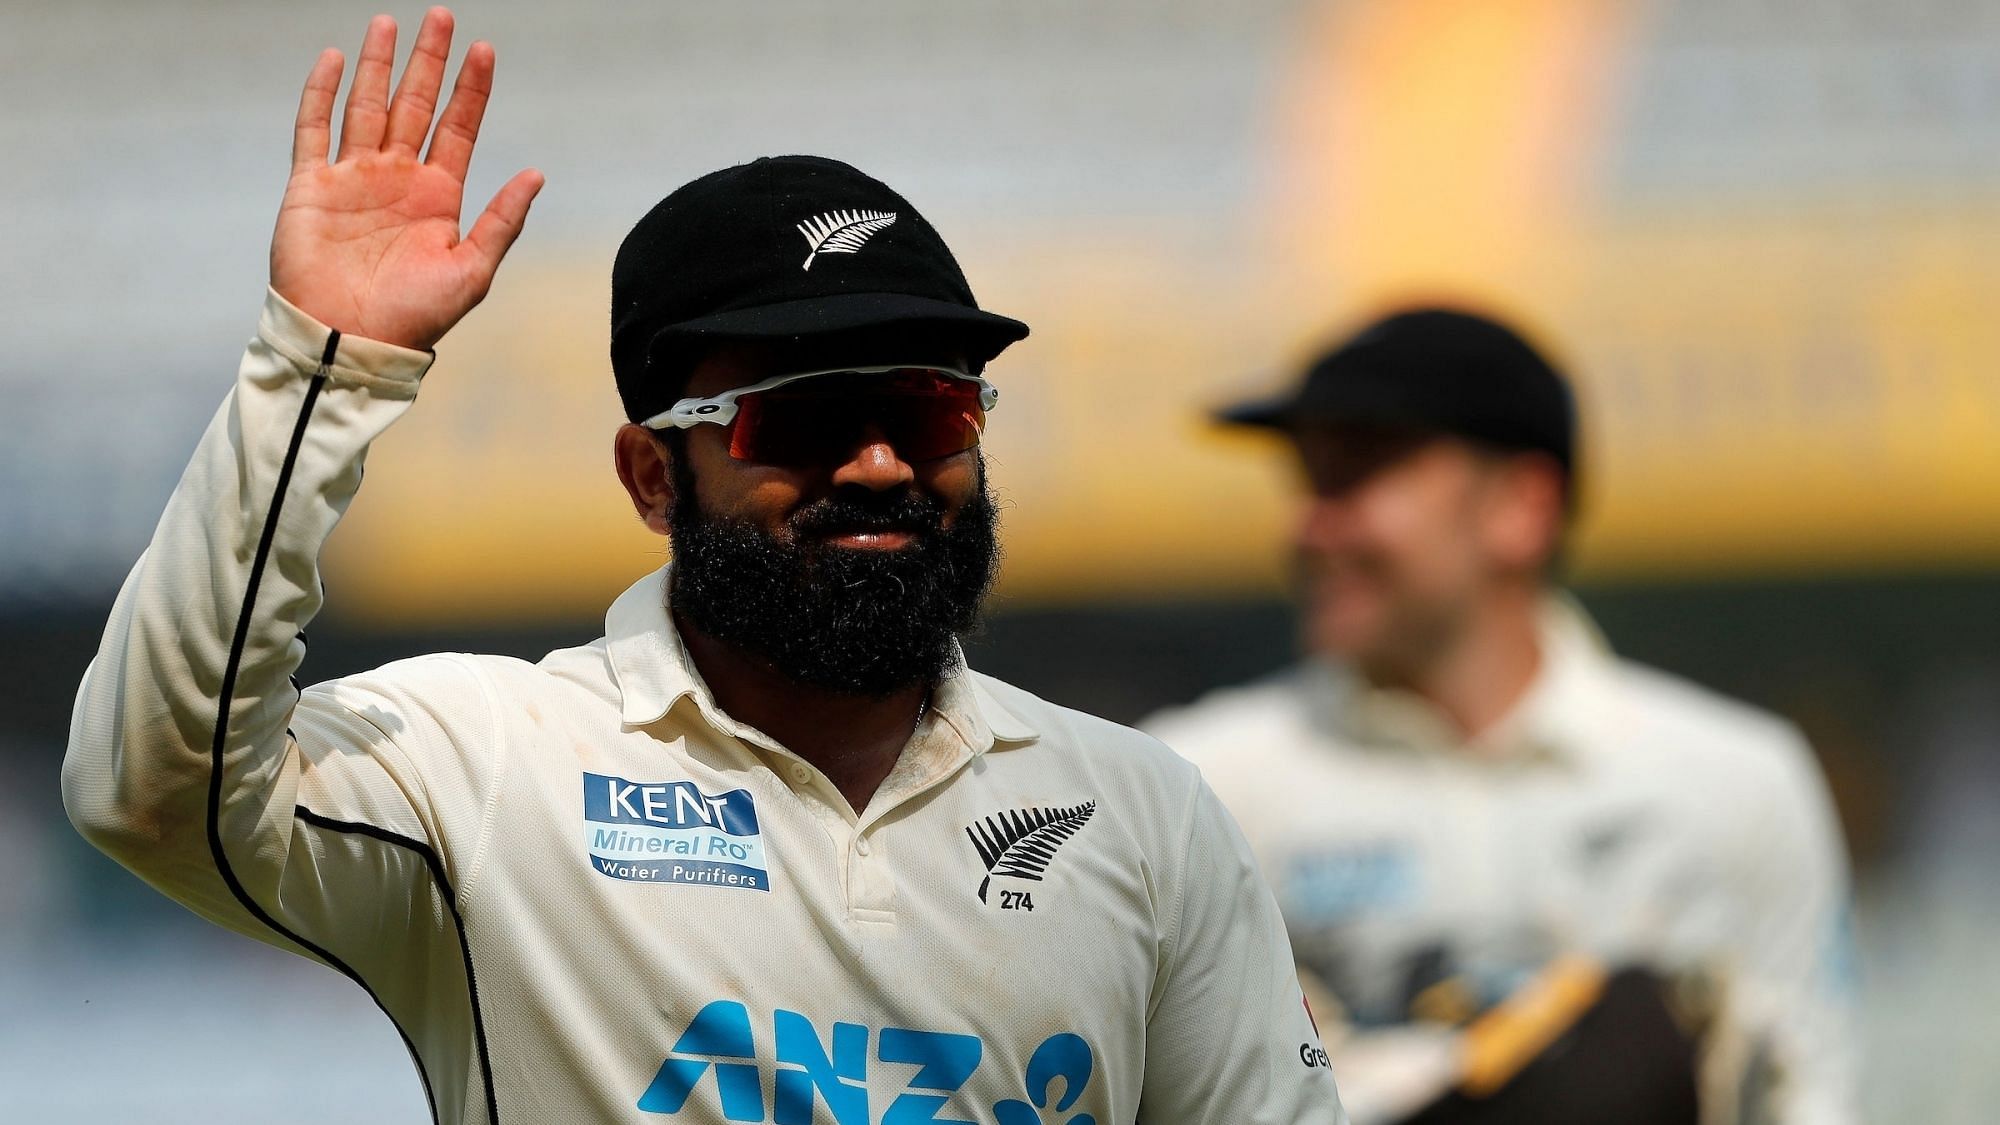 <div class="paragraphs"><p>New Zealand bowler&nbsp; Ajaz Patel took all 10 wickets in an innings joining Jim Laker and  Anil Kumble in an elite list.</p></div>